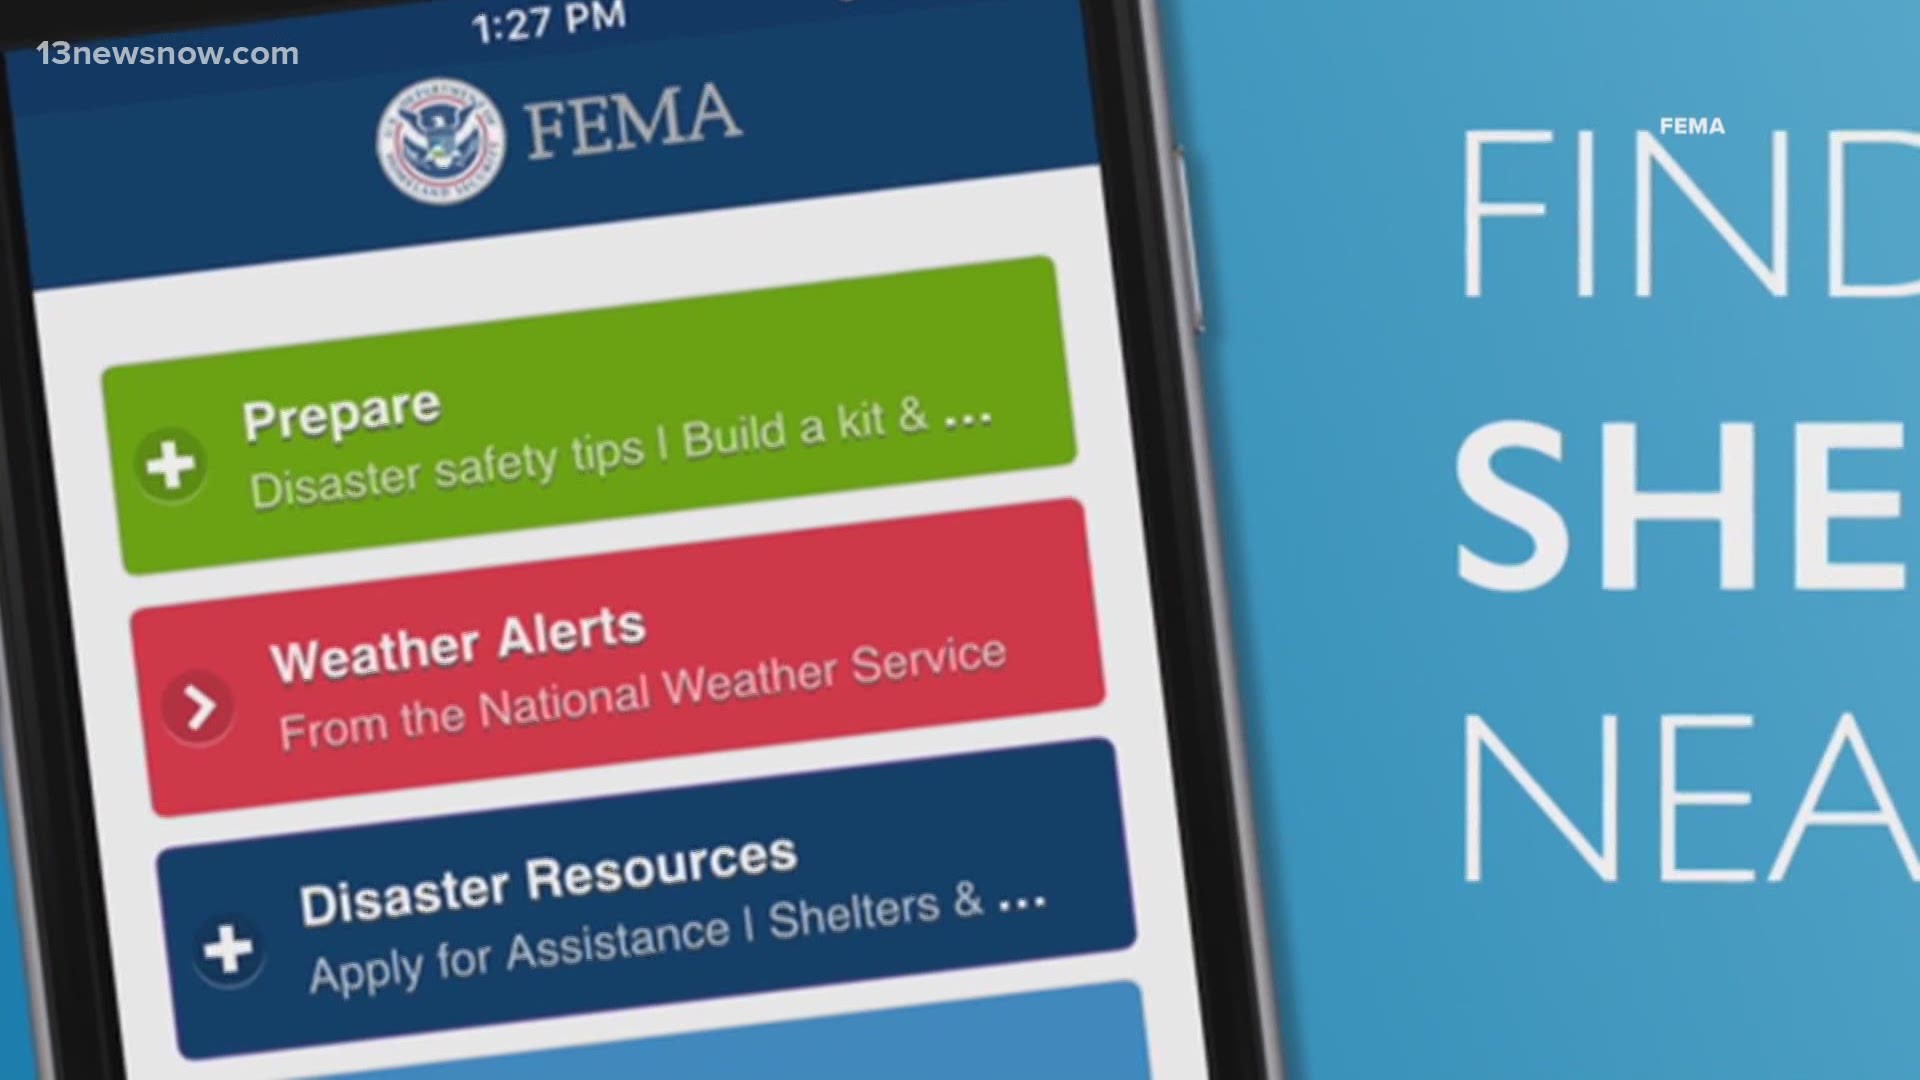 FEMA administrators met with leaders in Virginia Beach to talk about hurricane preparedness and safety plans. 13News Now Madison Kimbro has the story.